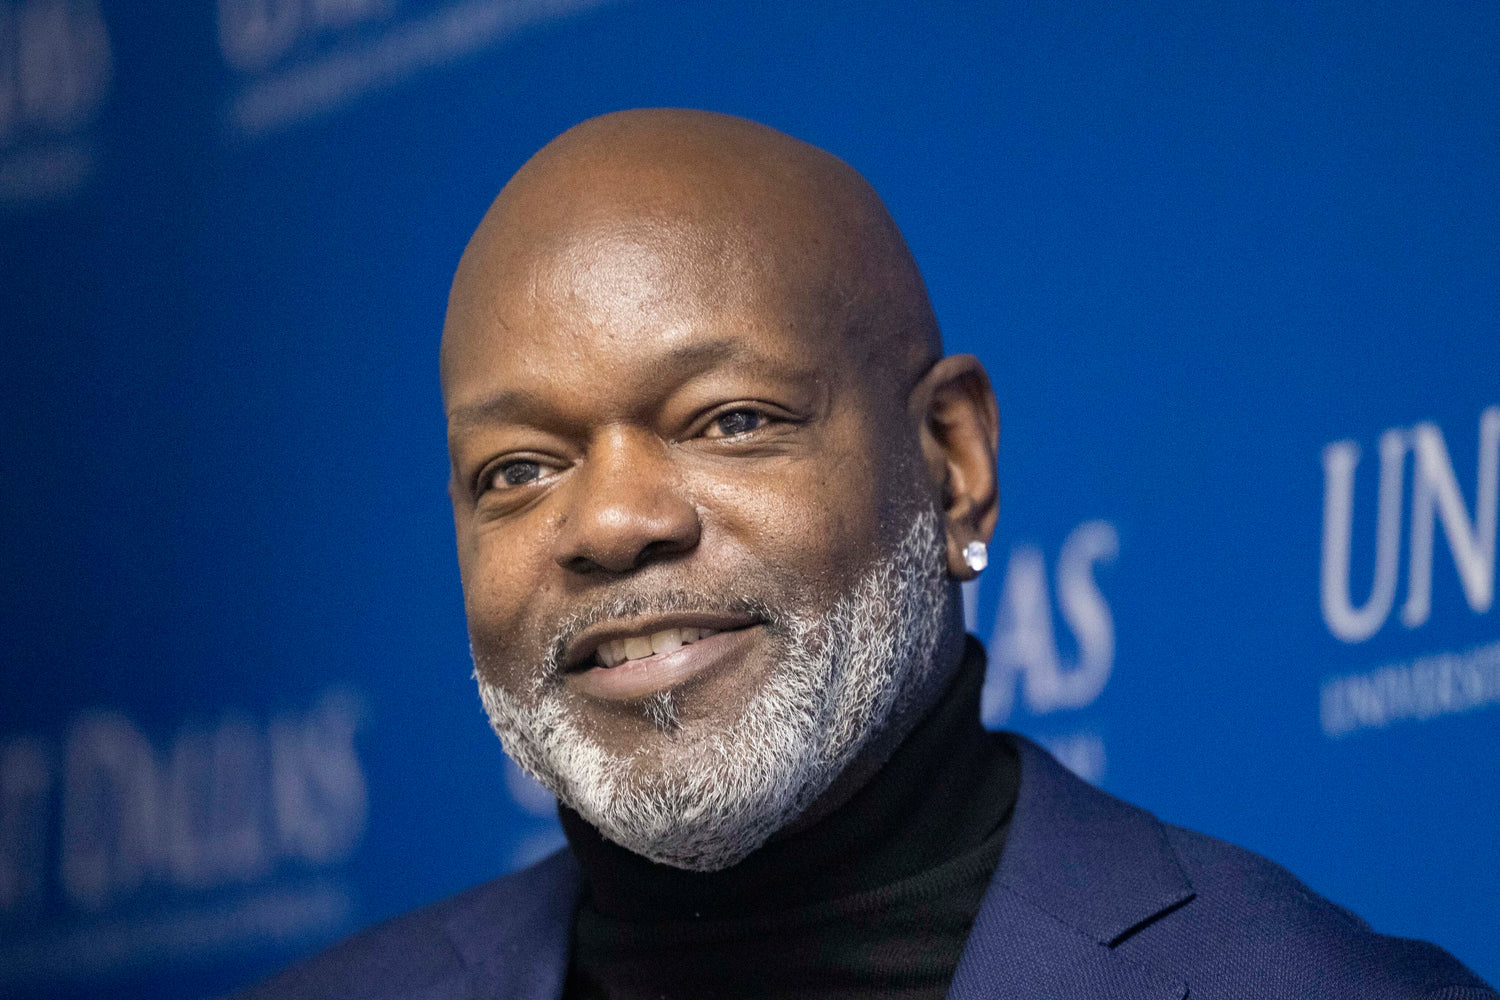 Emmitt Smith gets sued by investors after suffering $67M loss from Las Vegas restaurant